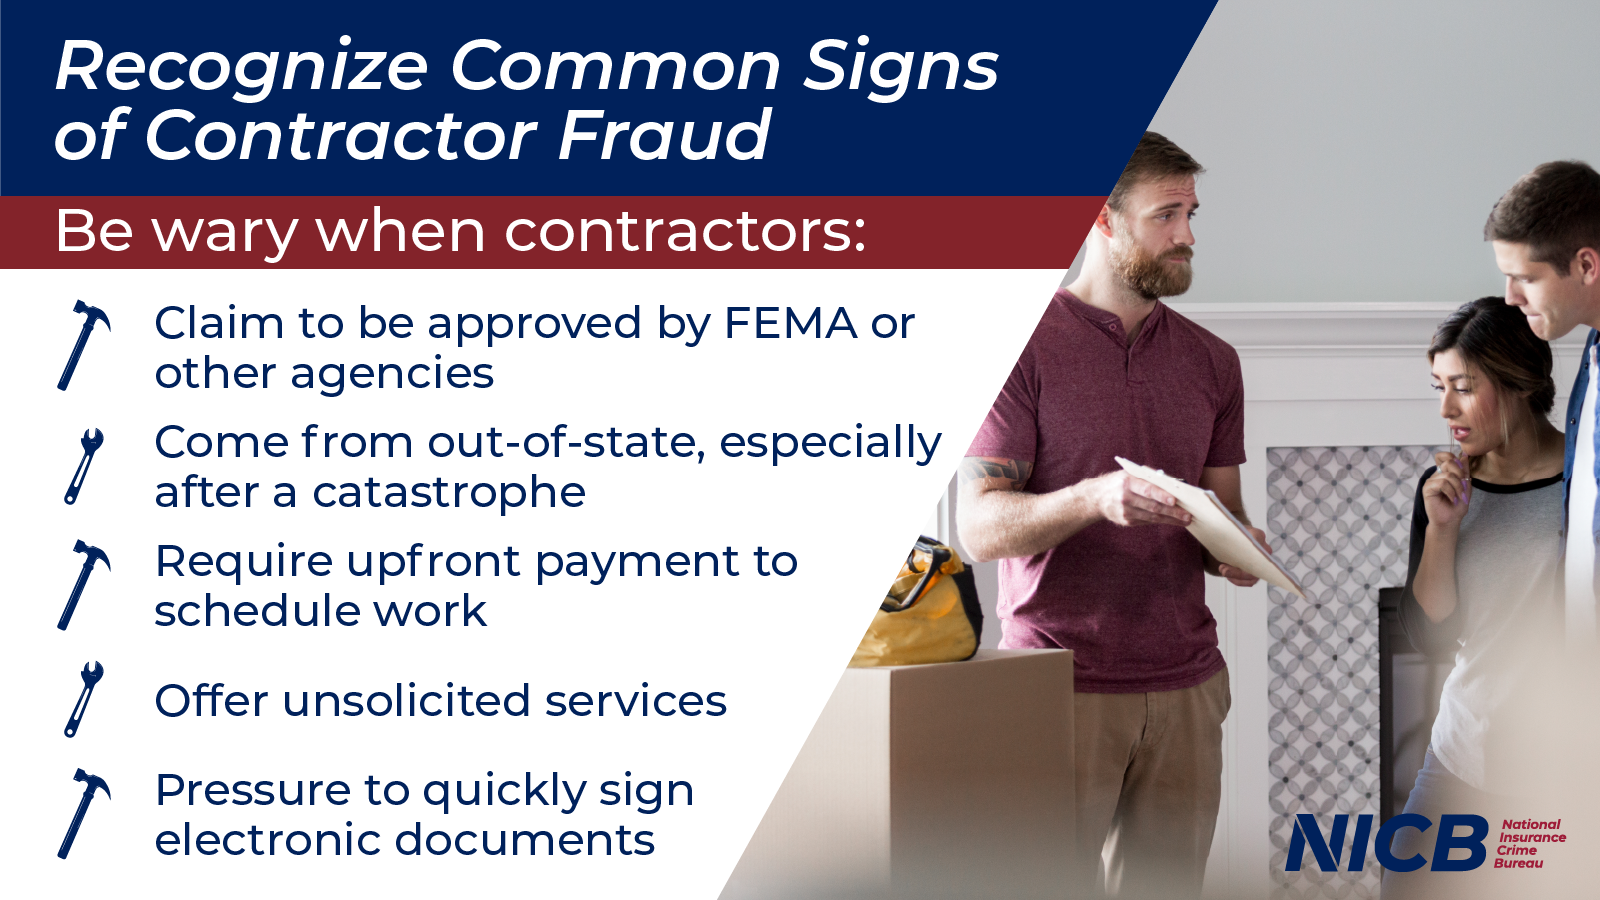 Recognize Common Signs of Contractor Fraud